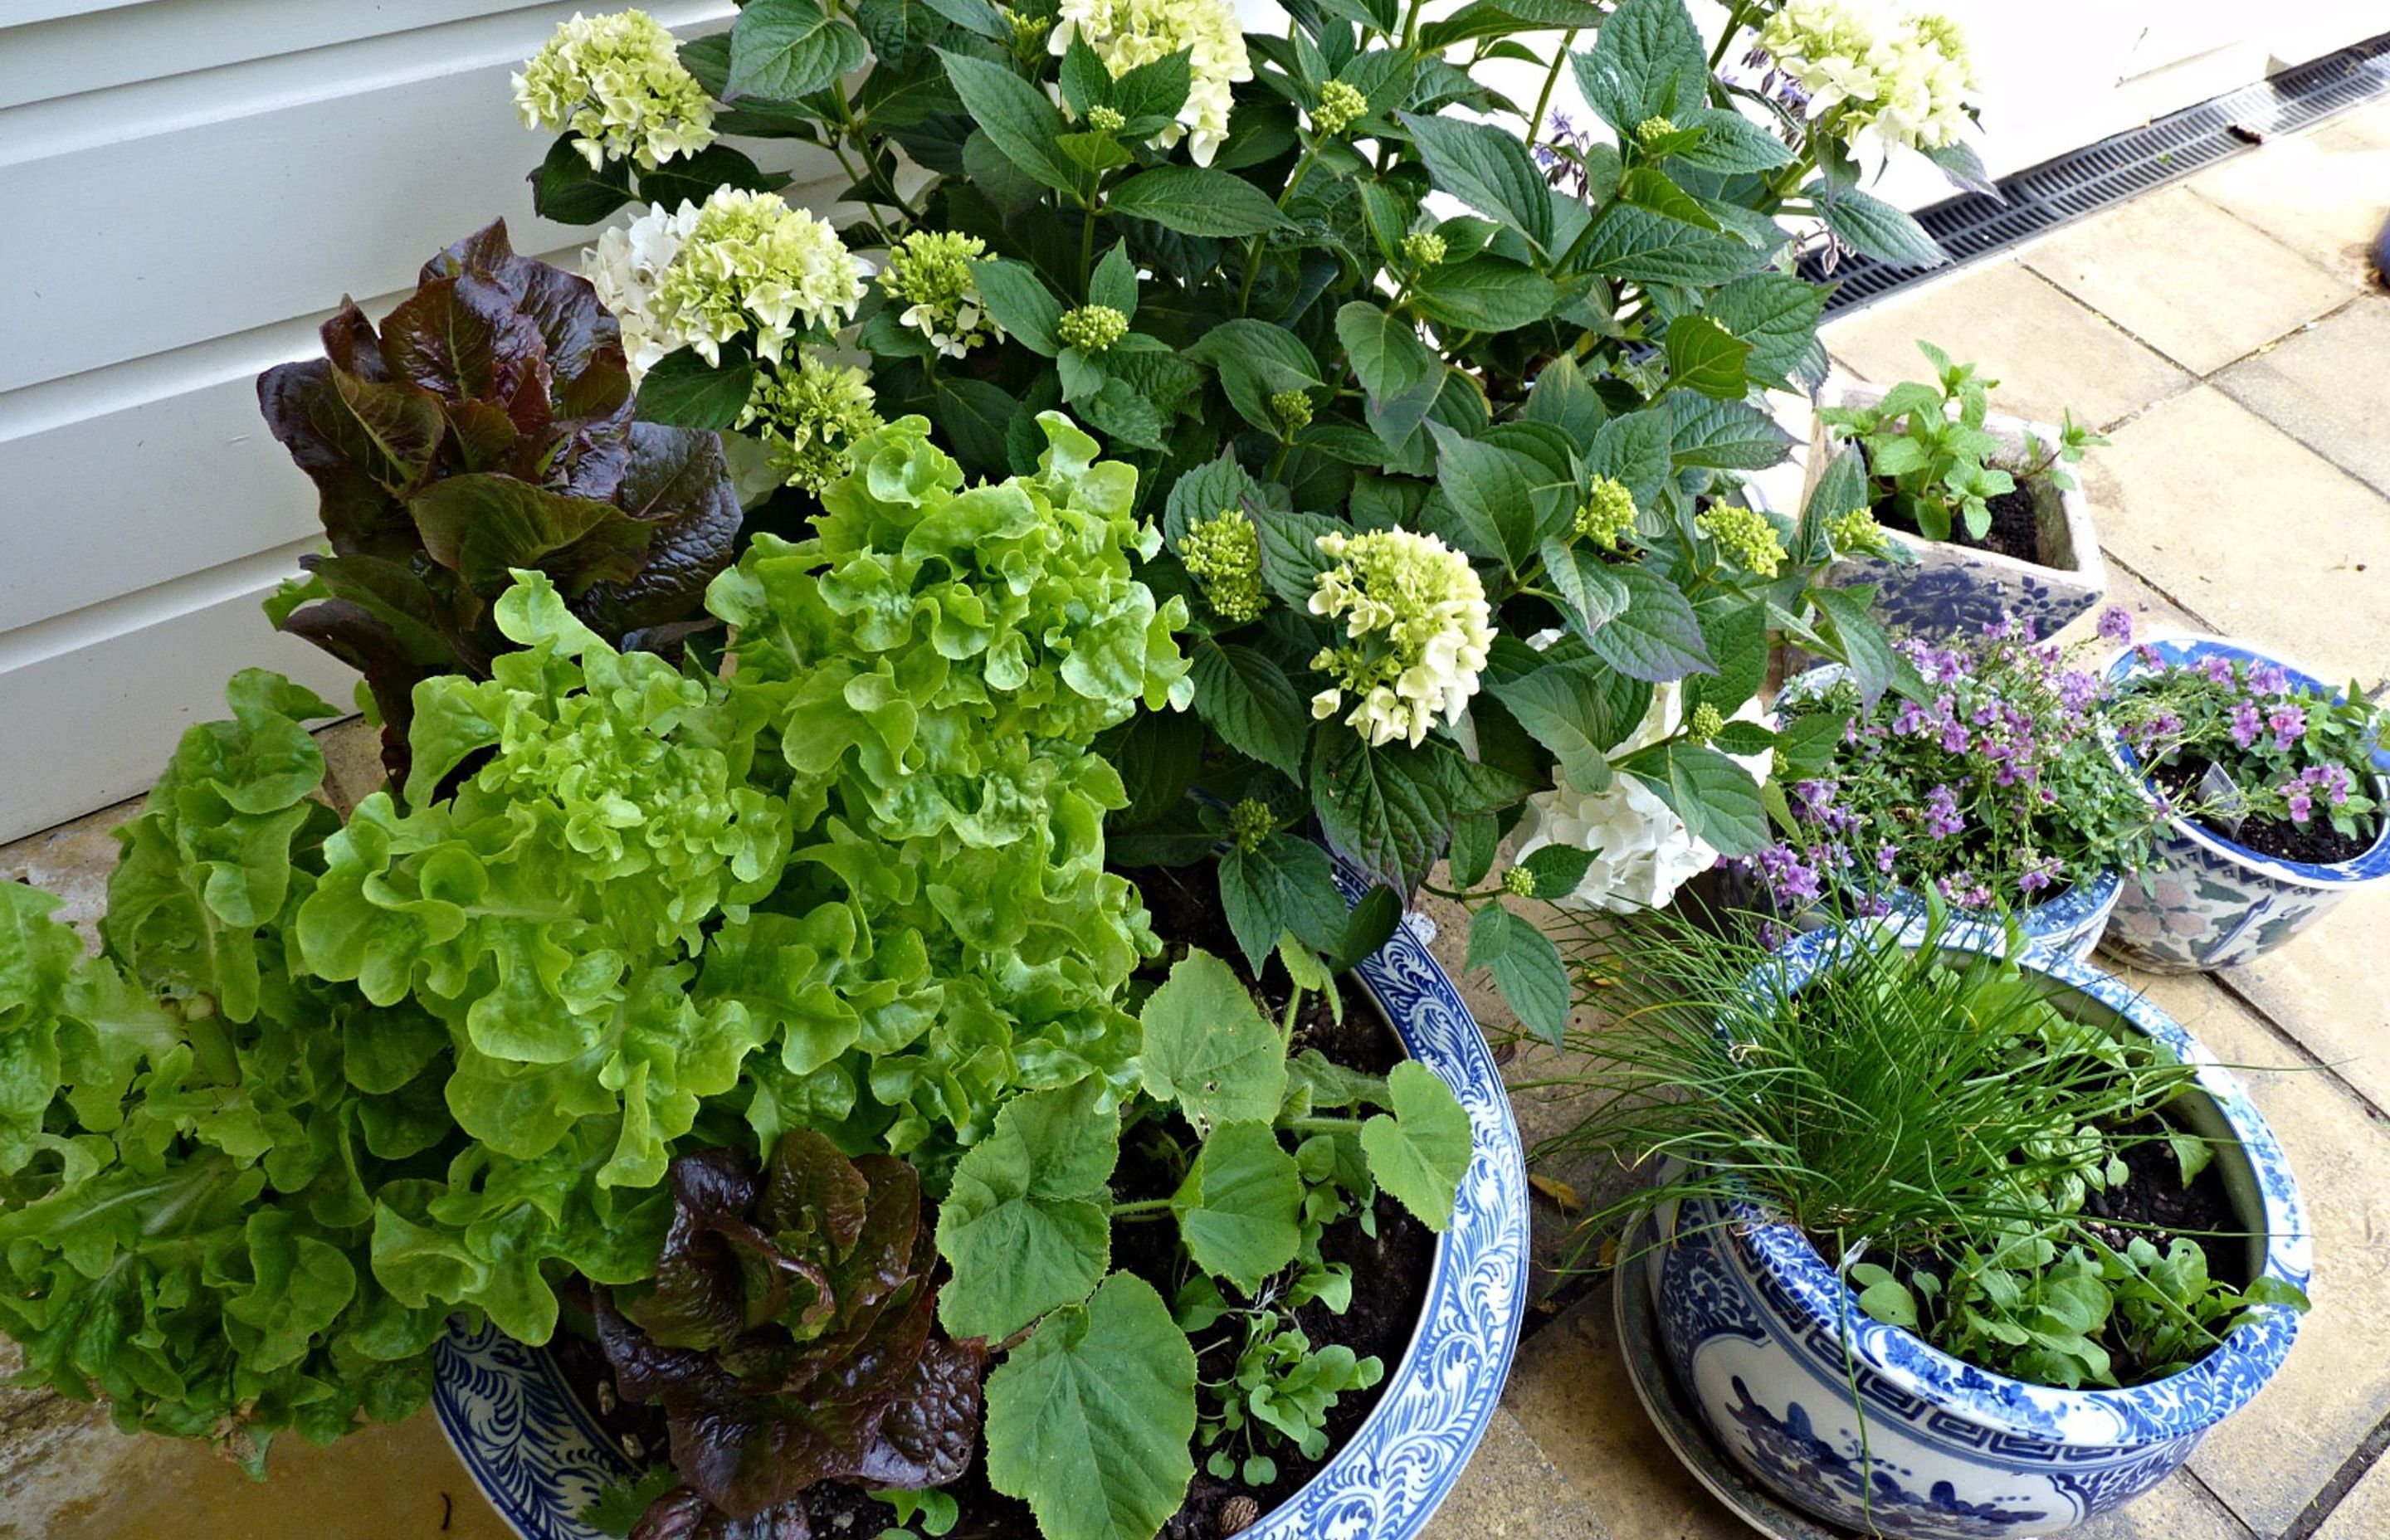 Blue &amp; white pots for salad greens &amp; herbs